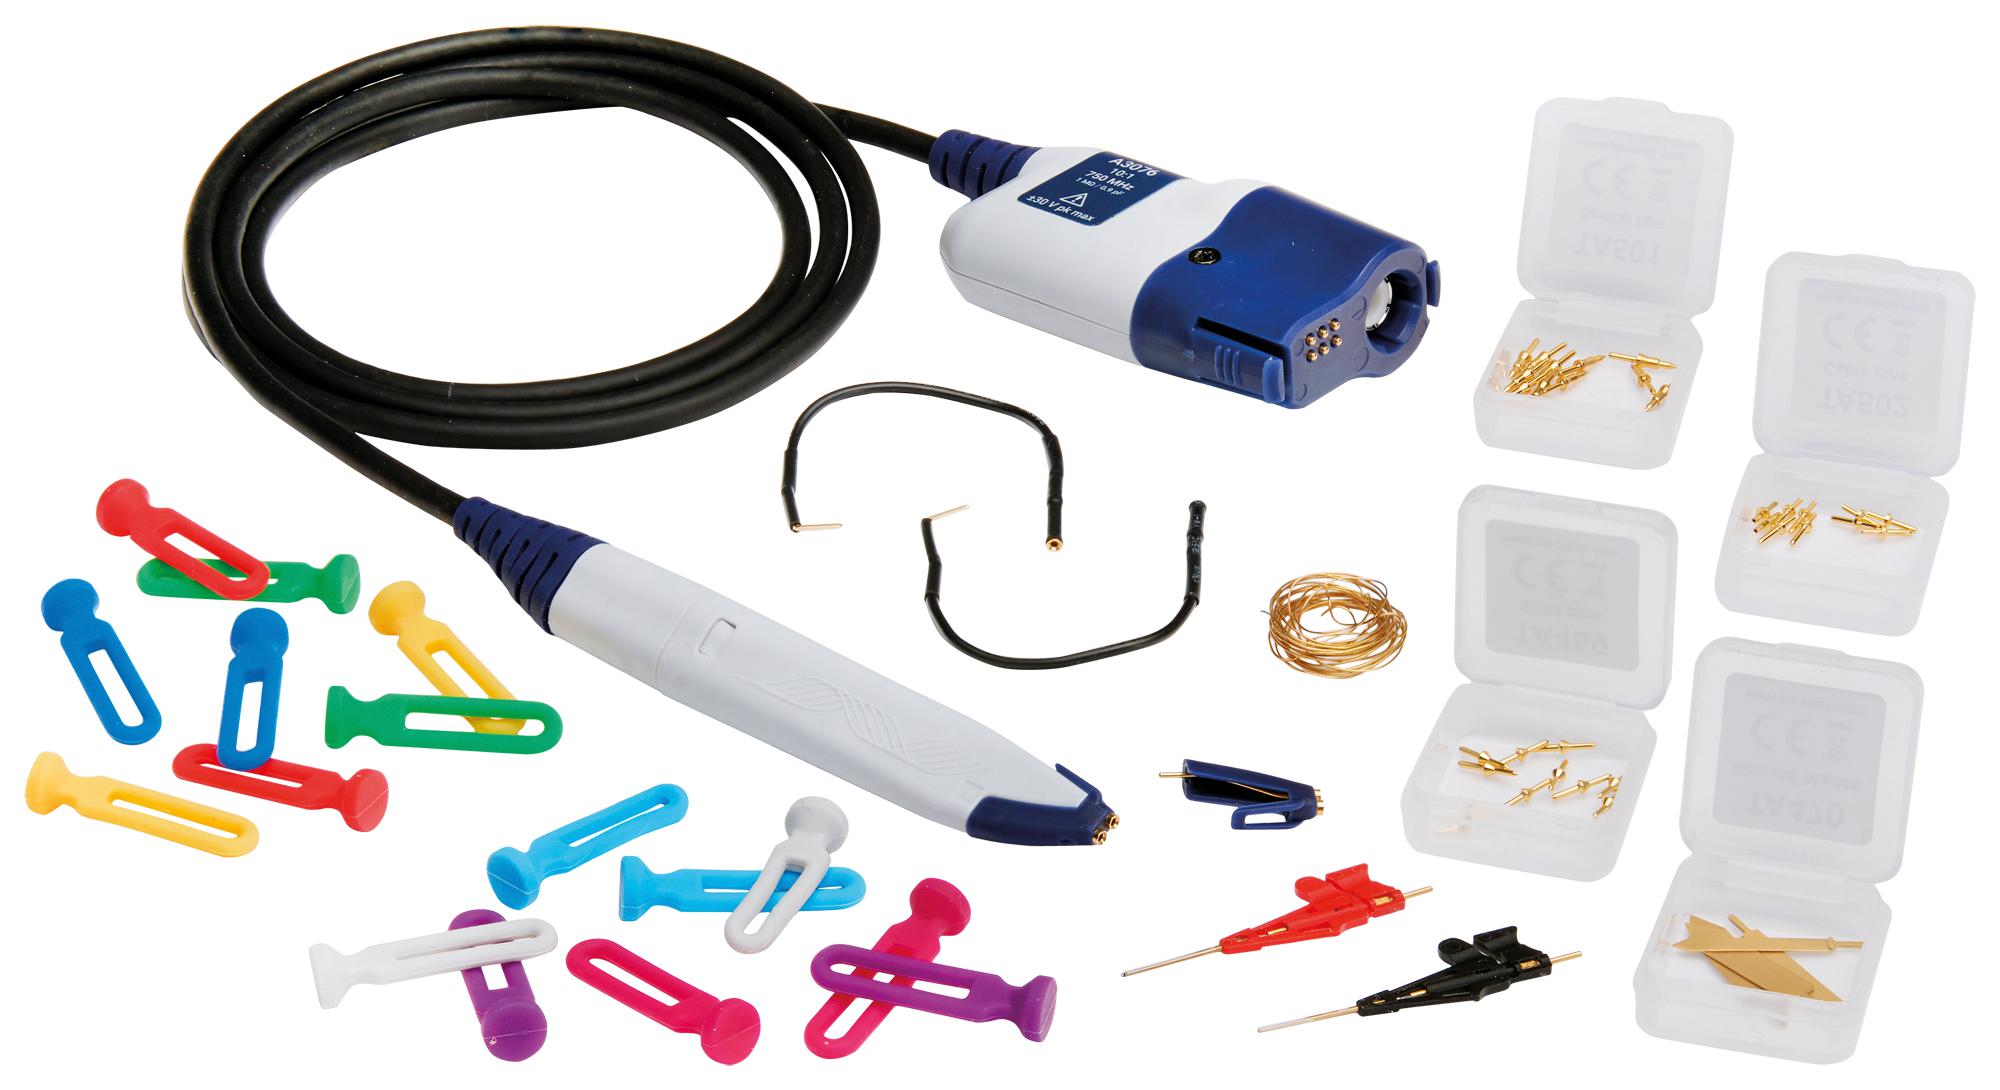 A3136 SINGLE ENDED ACTIVE PROBE KIT, 1.3 GHZ PICO TECHNOLOGY